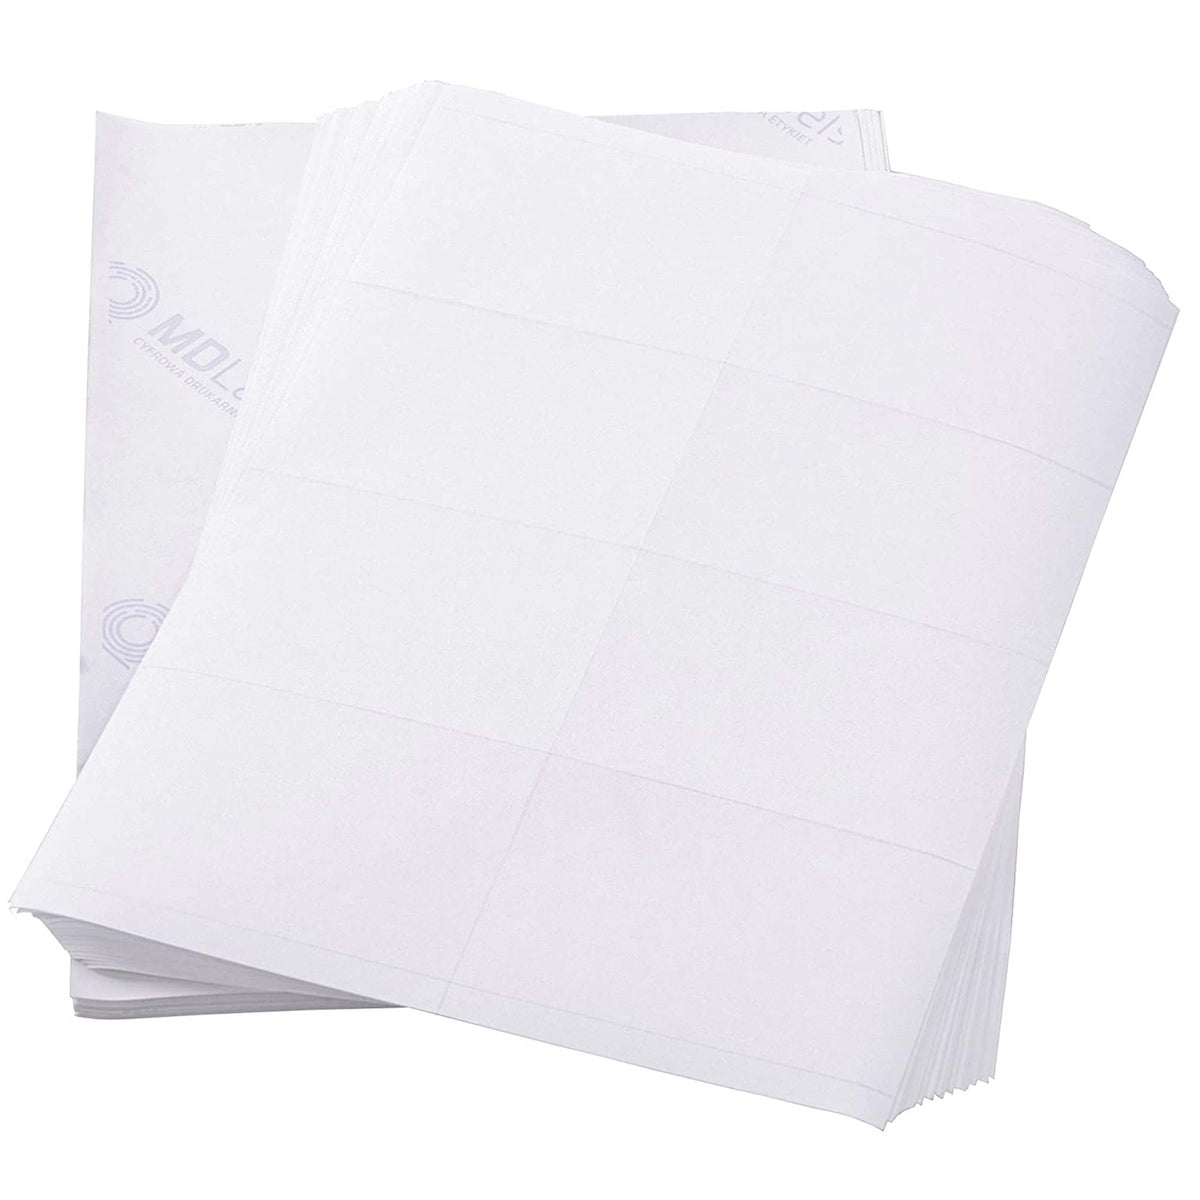 Self-adhesive labels on A4 sheets 105x70mm 100 sheets